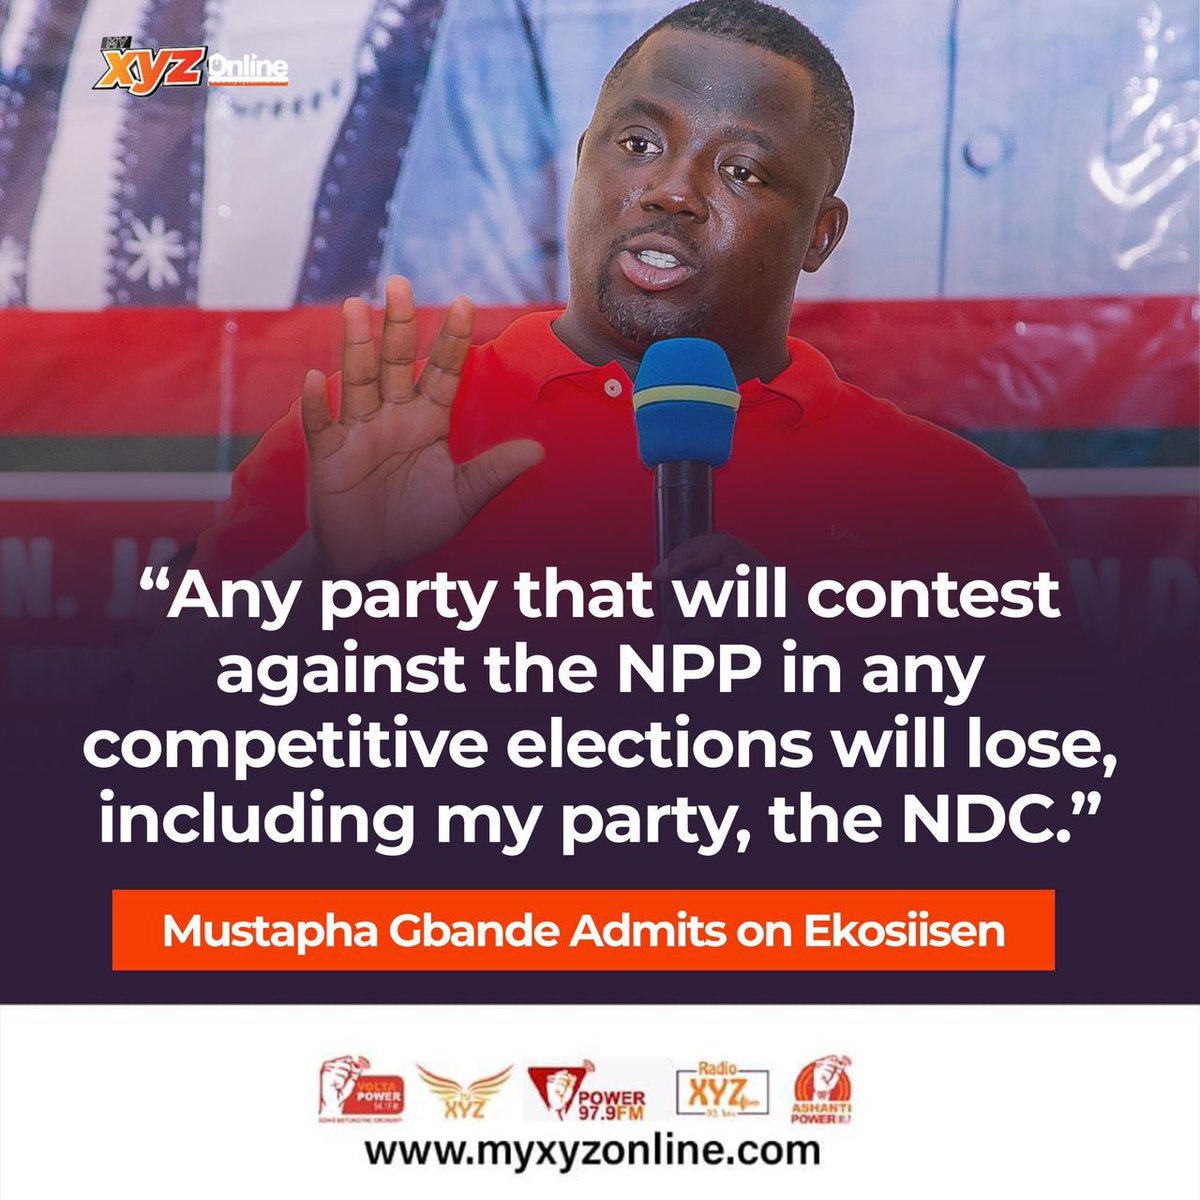 During an interview on Ekosiisen, Mustapha Gbande openly acknowledged that any political party, including his own, the NDC, would face defeat in competitive elections when pitted against the NPP.

#ItIsPossible 
#DMB2024
#Bawumia2024